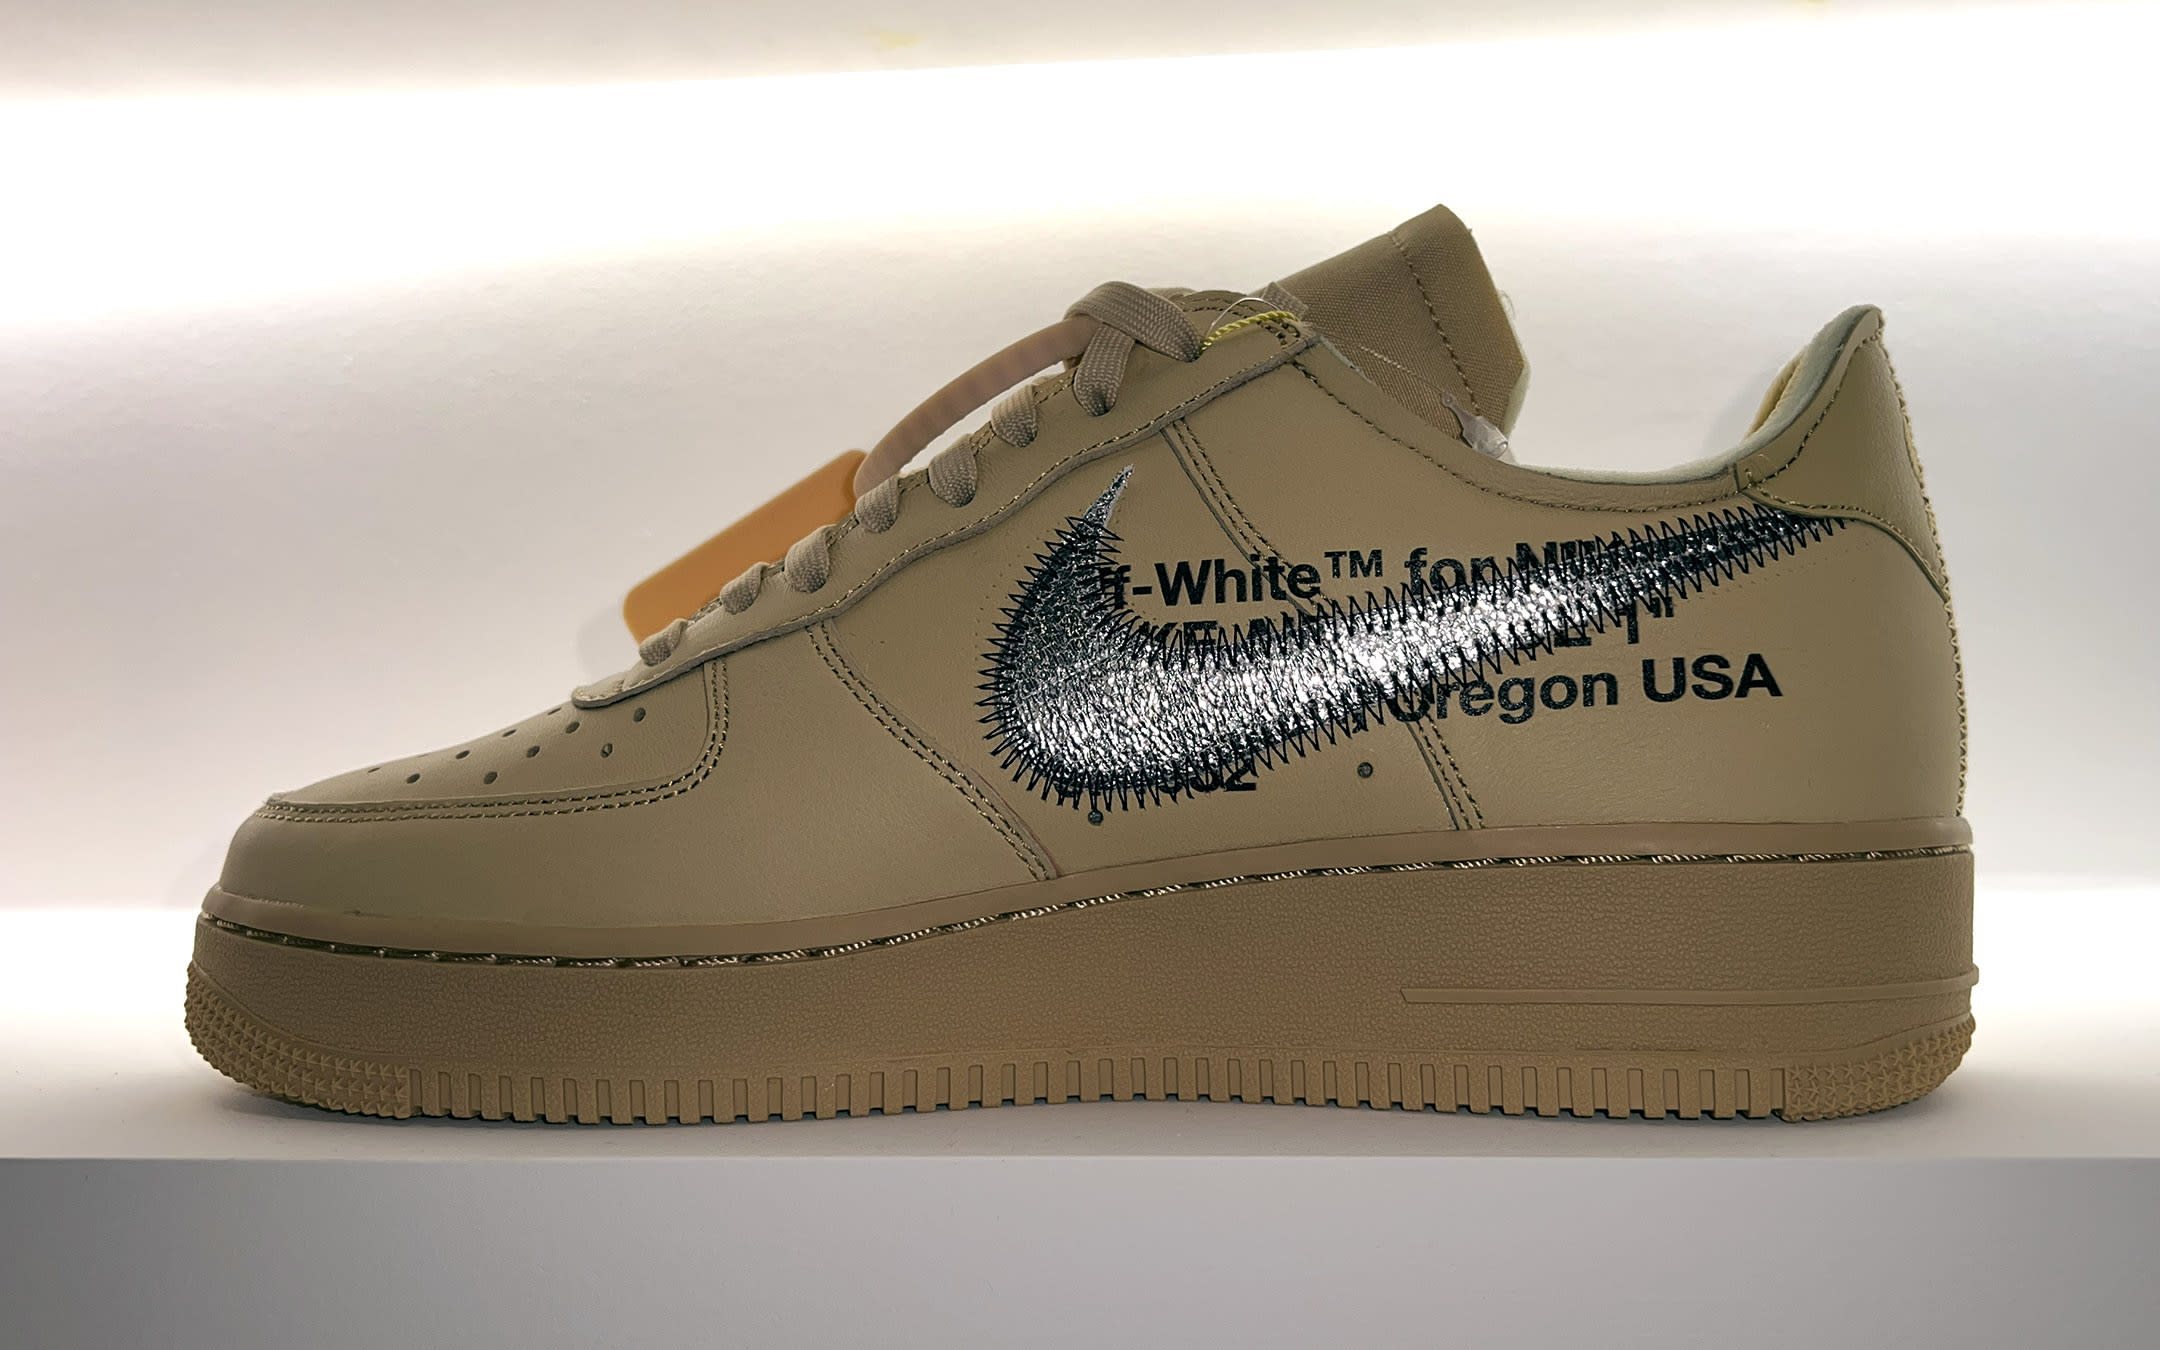 A look into the final Off-White™ x Nike Air Force 1 collaboration